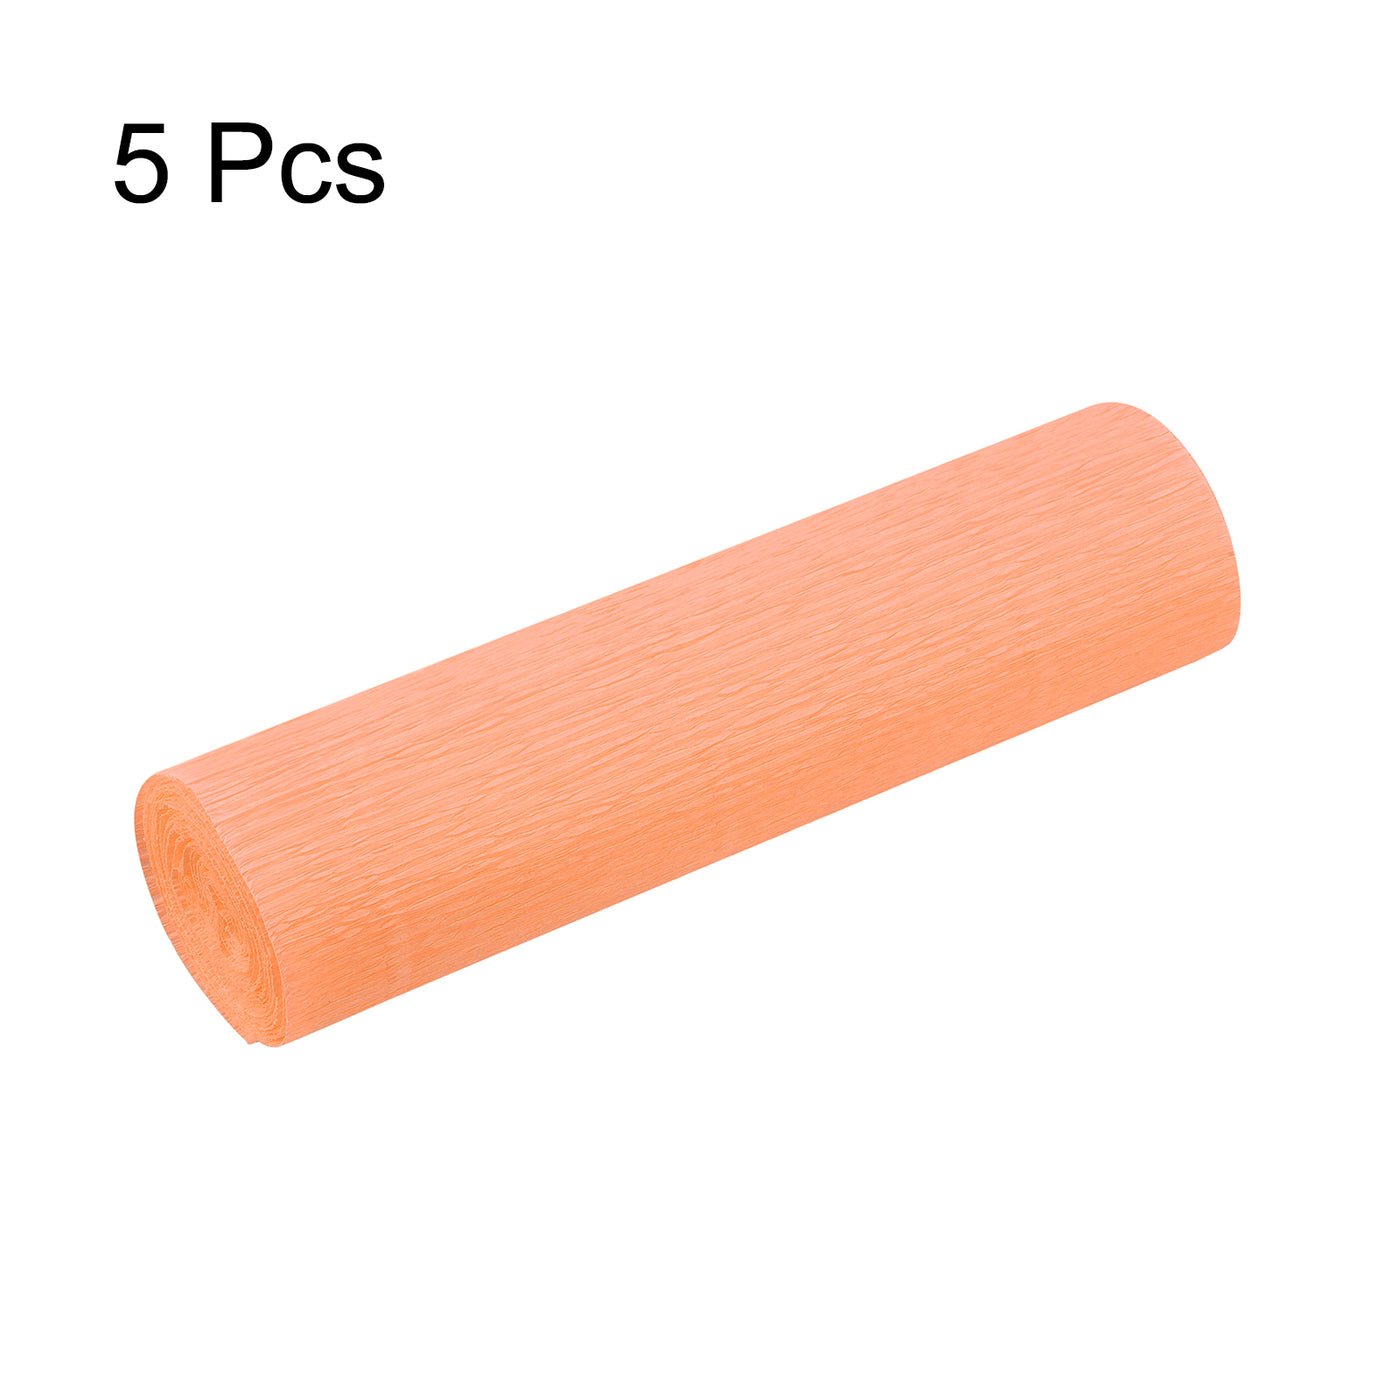 Harfington Crepe Paper Roll Decoration 8.2ft Long 5.9 Inch Wide, Apricot Color Pack of 5